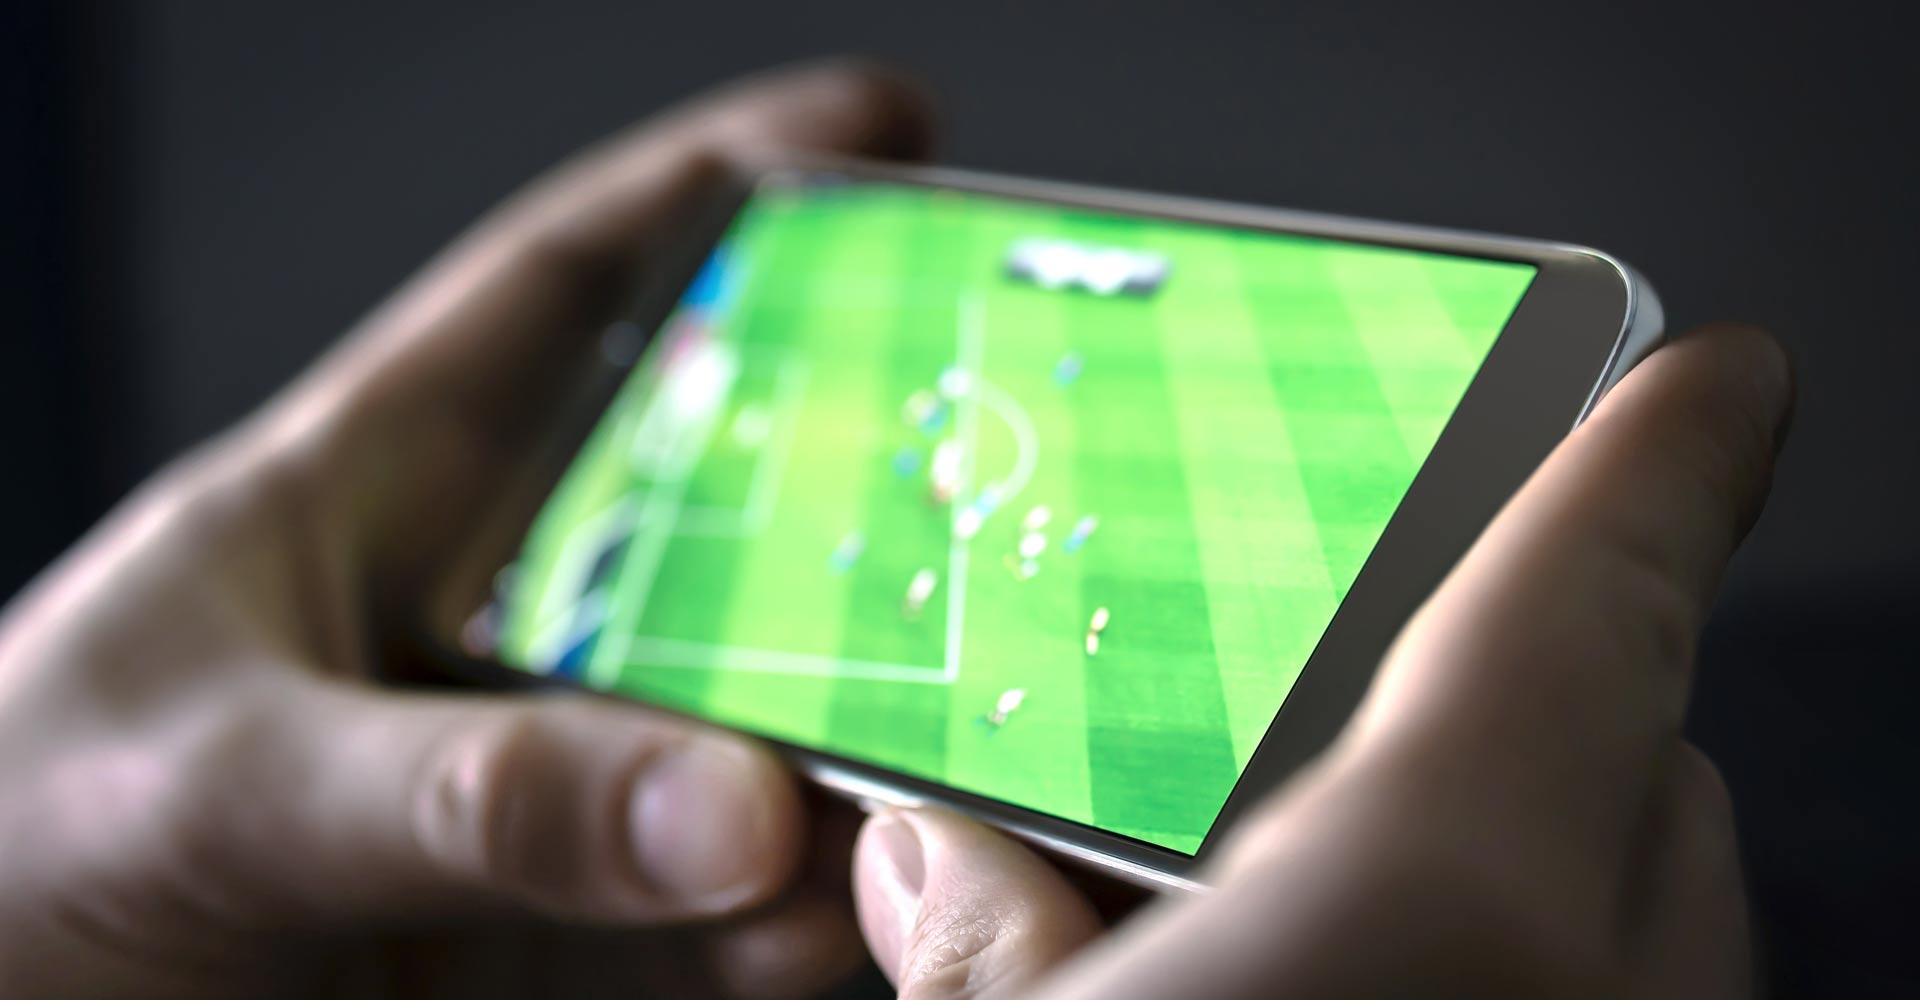 Data Shows Streaming Champions League Football Matches from Unverified Sources is One of the Hottest Ways for Cyber Hooligans to Hack Devices Avast